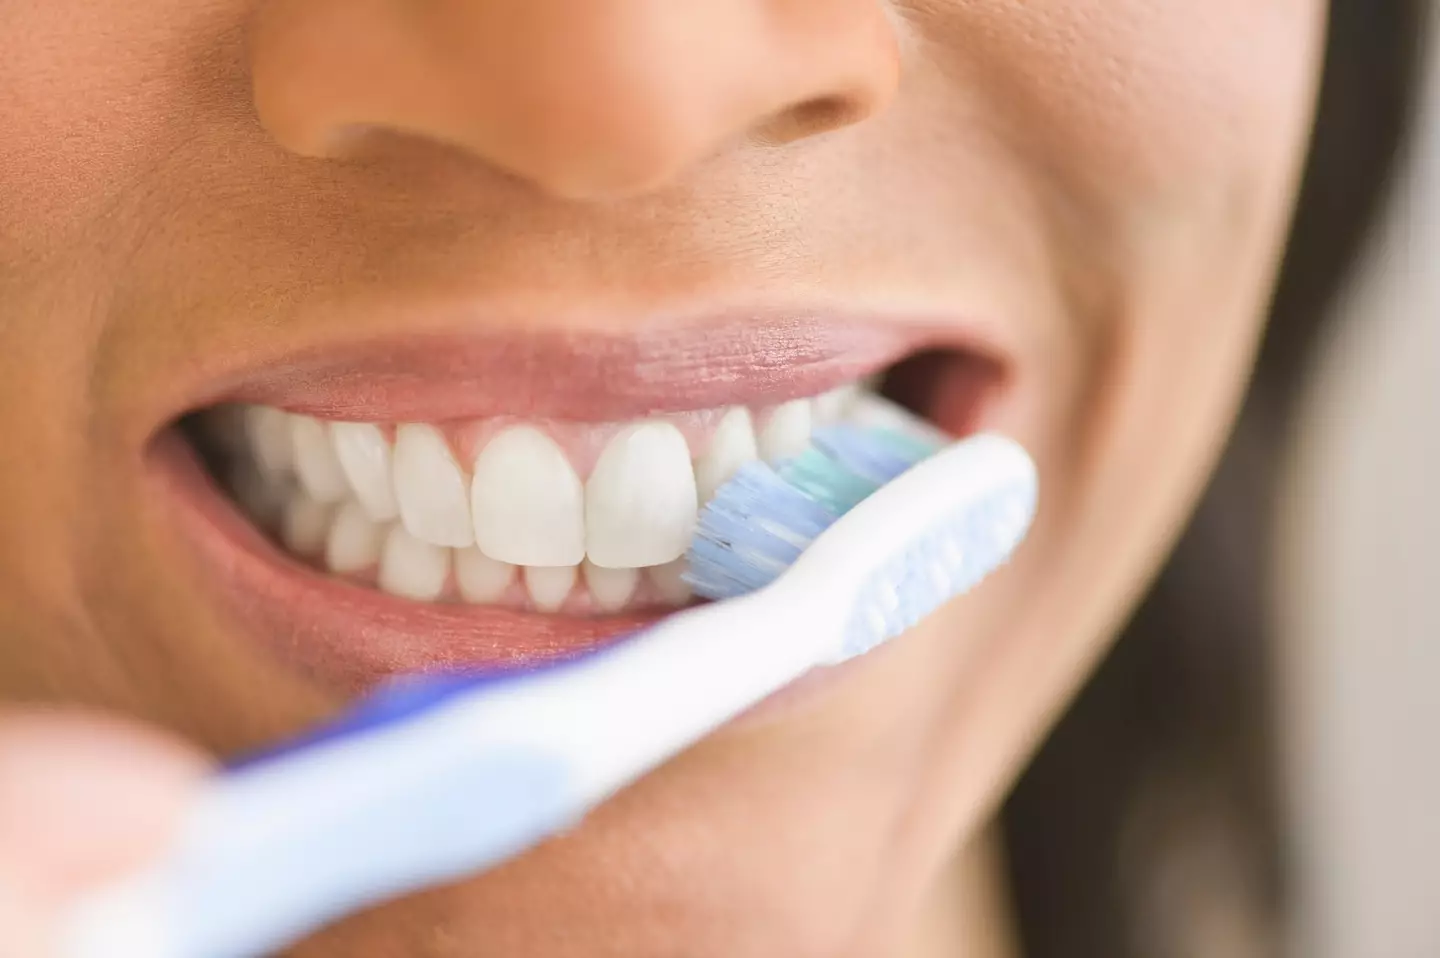 Experts have warned just how dangerous not brushing your teeth can be. (Tetra Images / Getty Images)